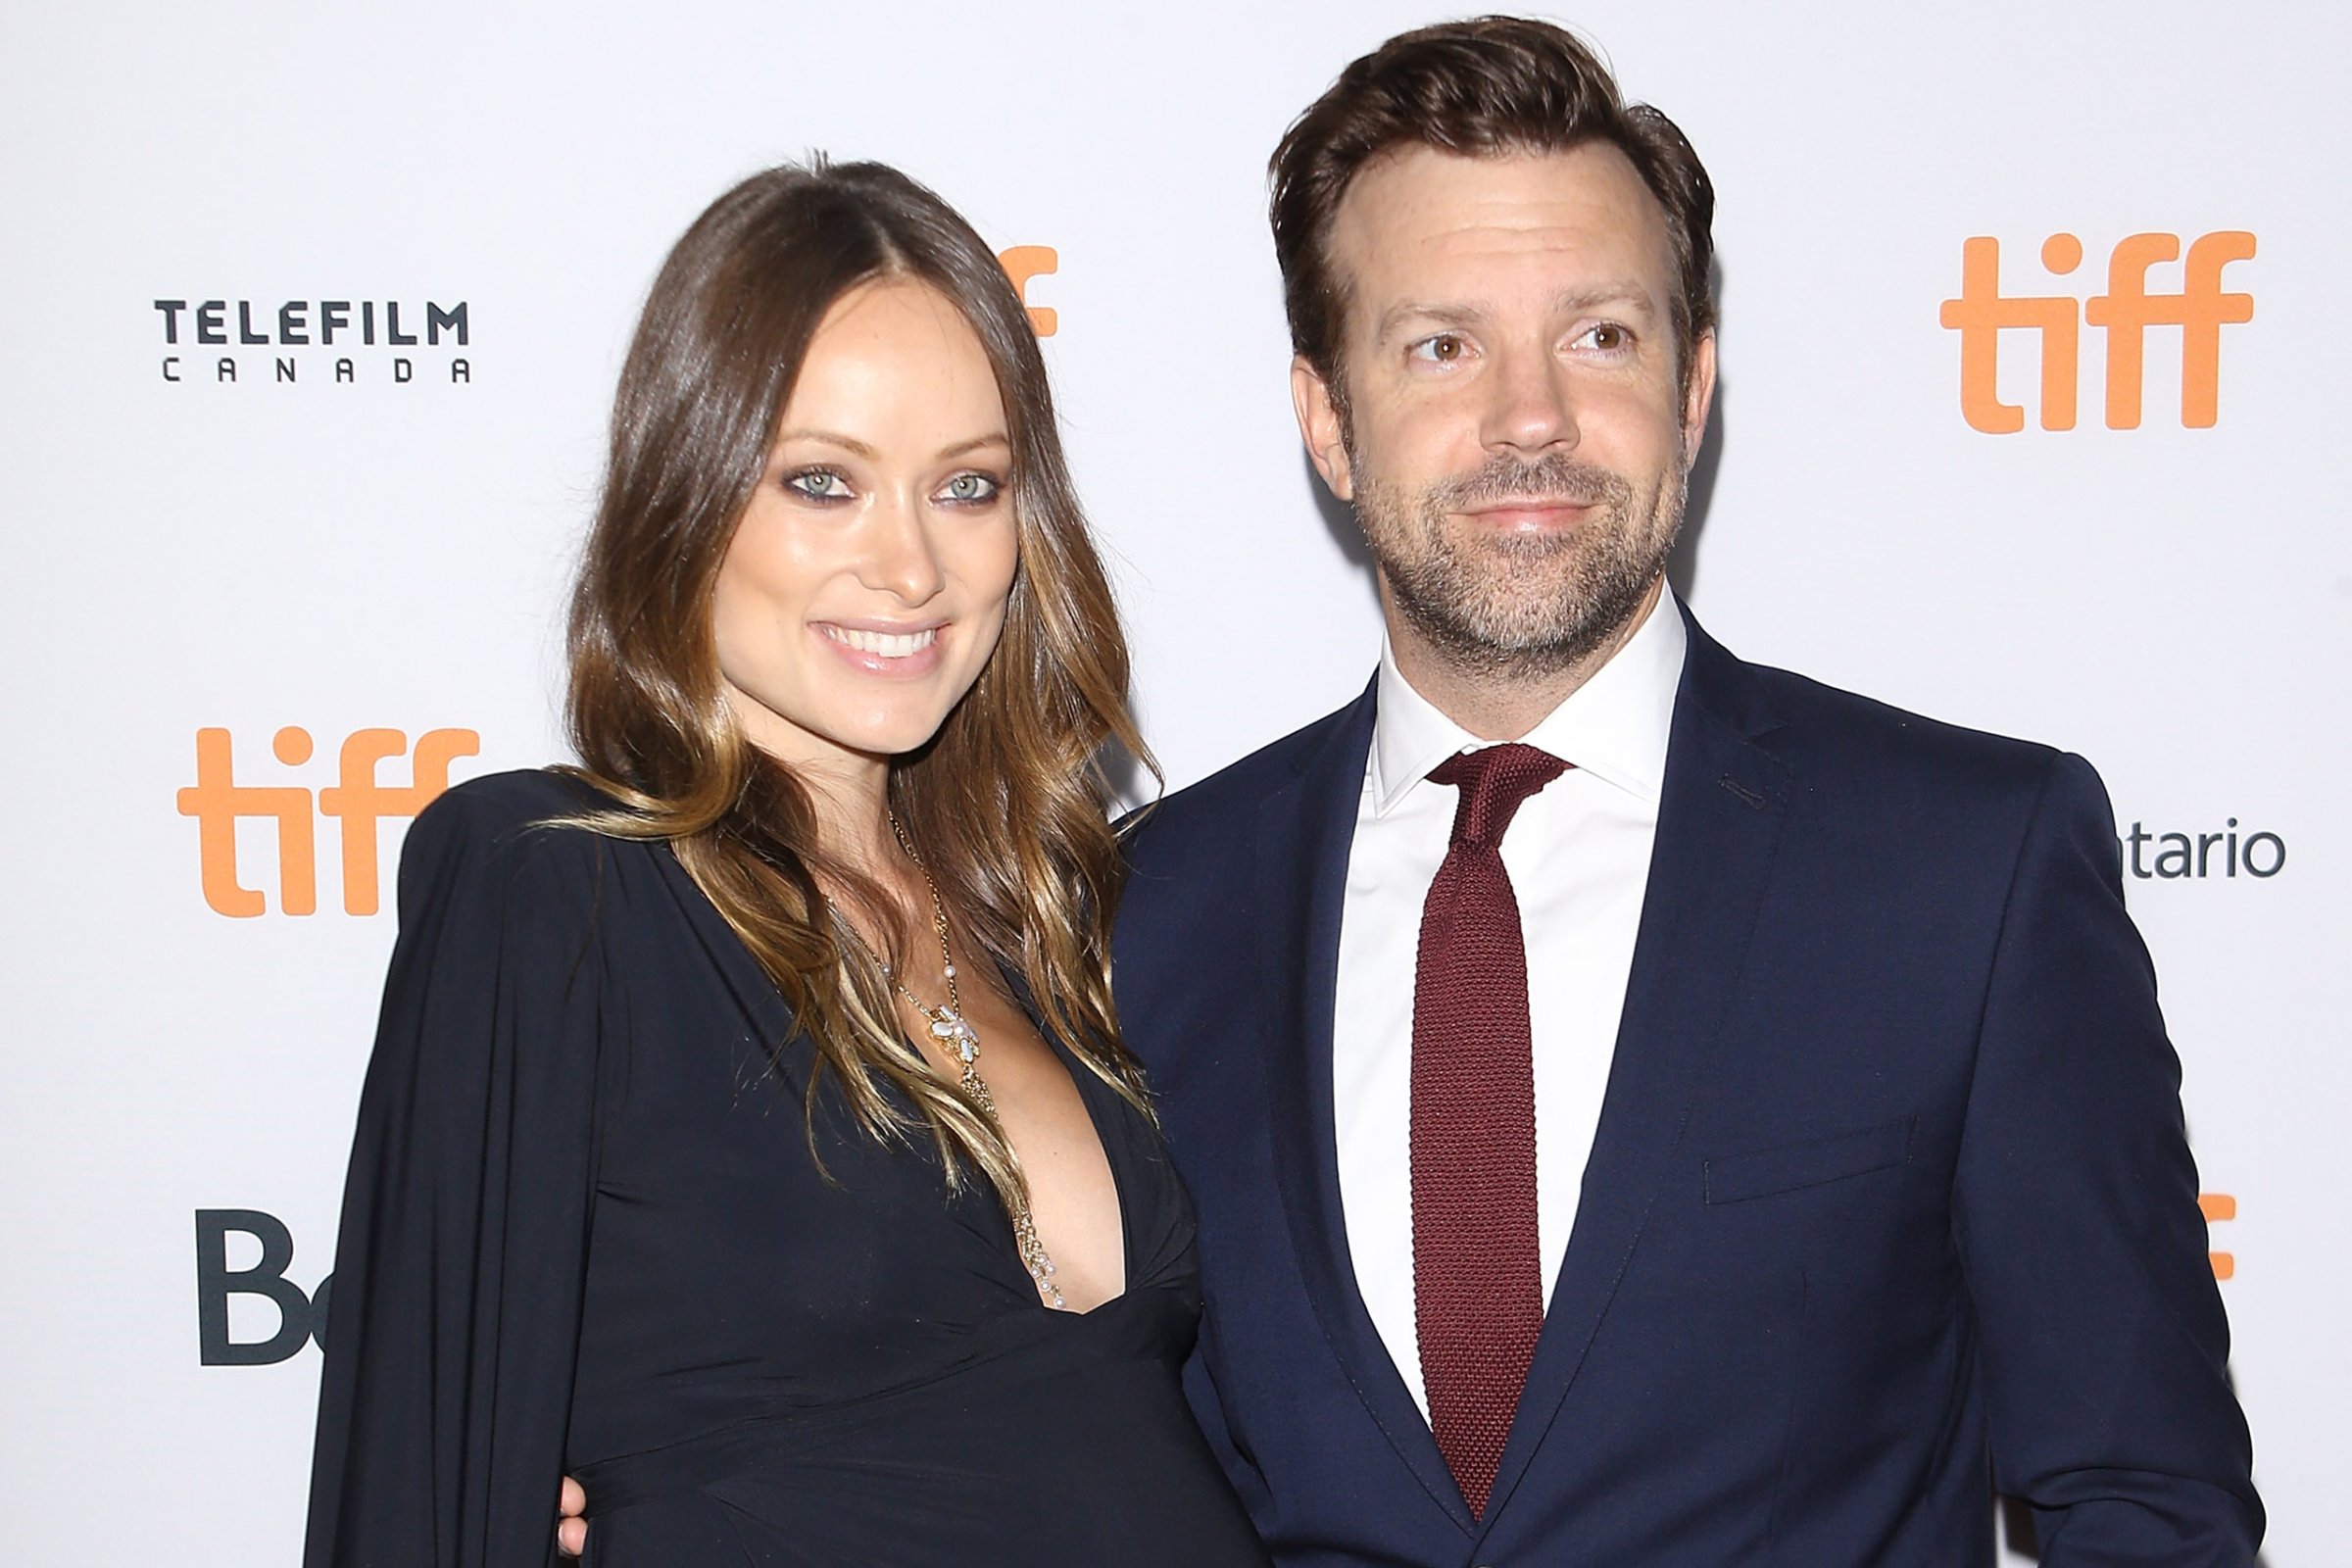 Olivia Wilde and Jason Sudeikis arrive at the 2016 Toronto International Film Festival's "Colossal" premiere at Ryerson Theatre in Toronto on Sept. 9, 2016.